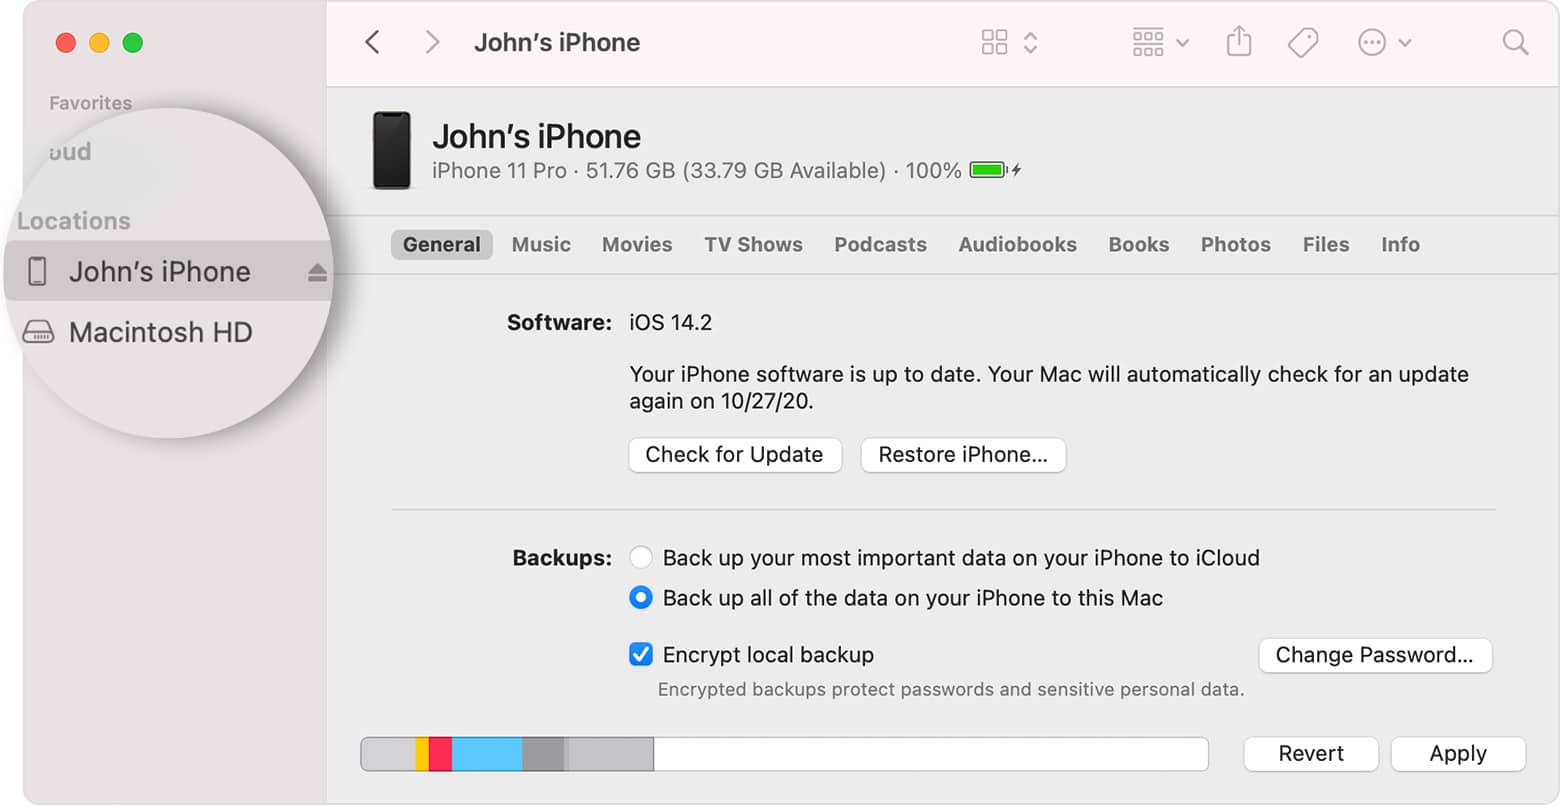  A screenshot of a computer with iTunes open and an iPhone connected to it. The iTunes window shows the iPhone's name, software version, and storage capacity.